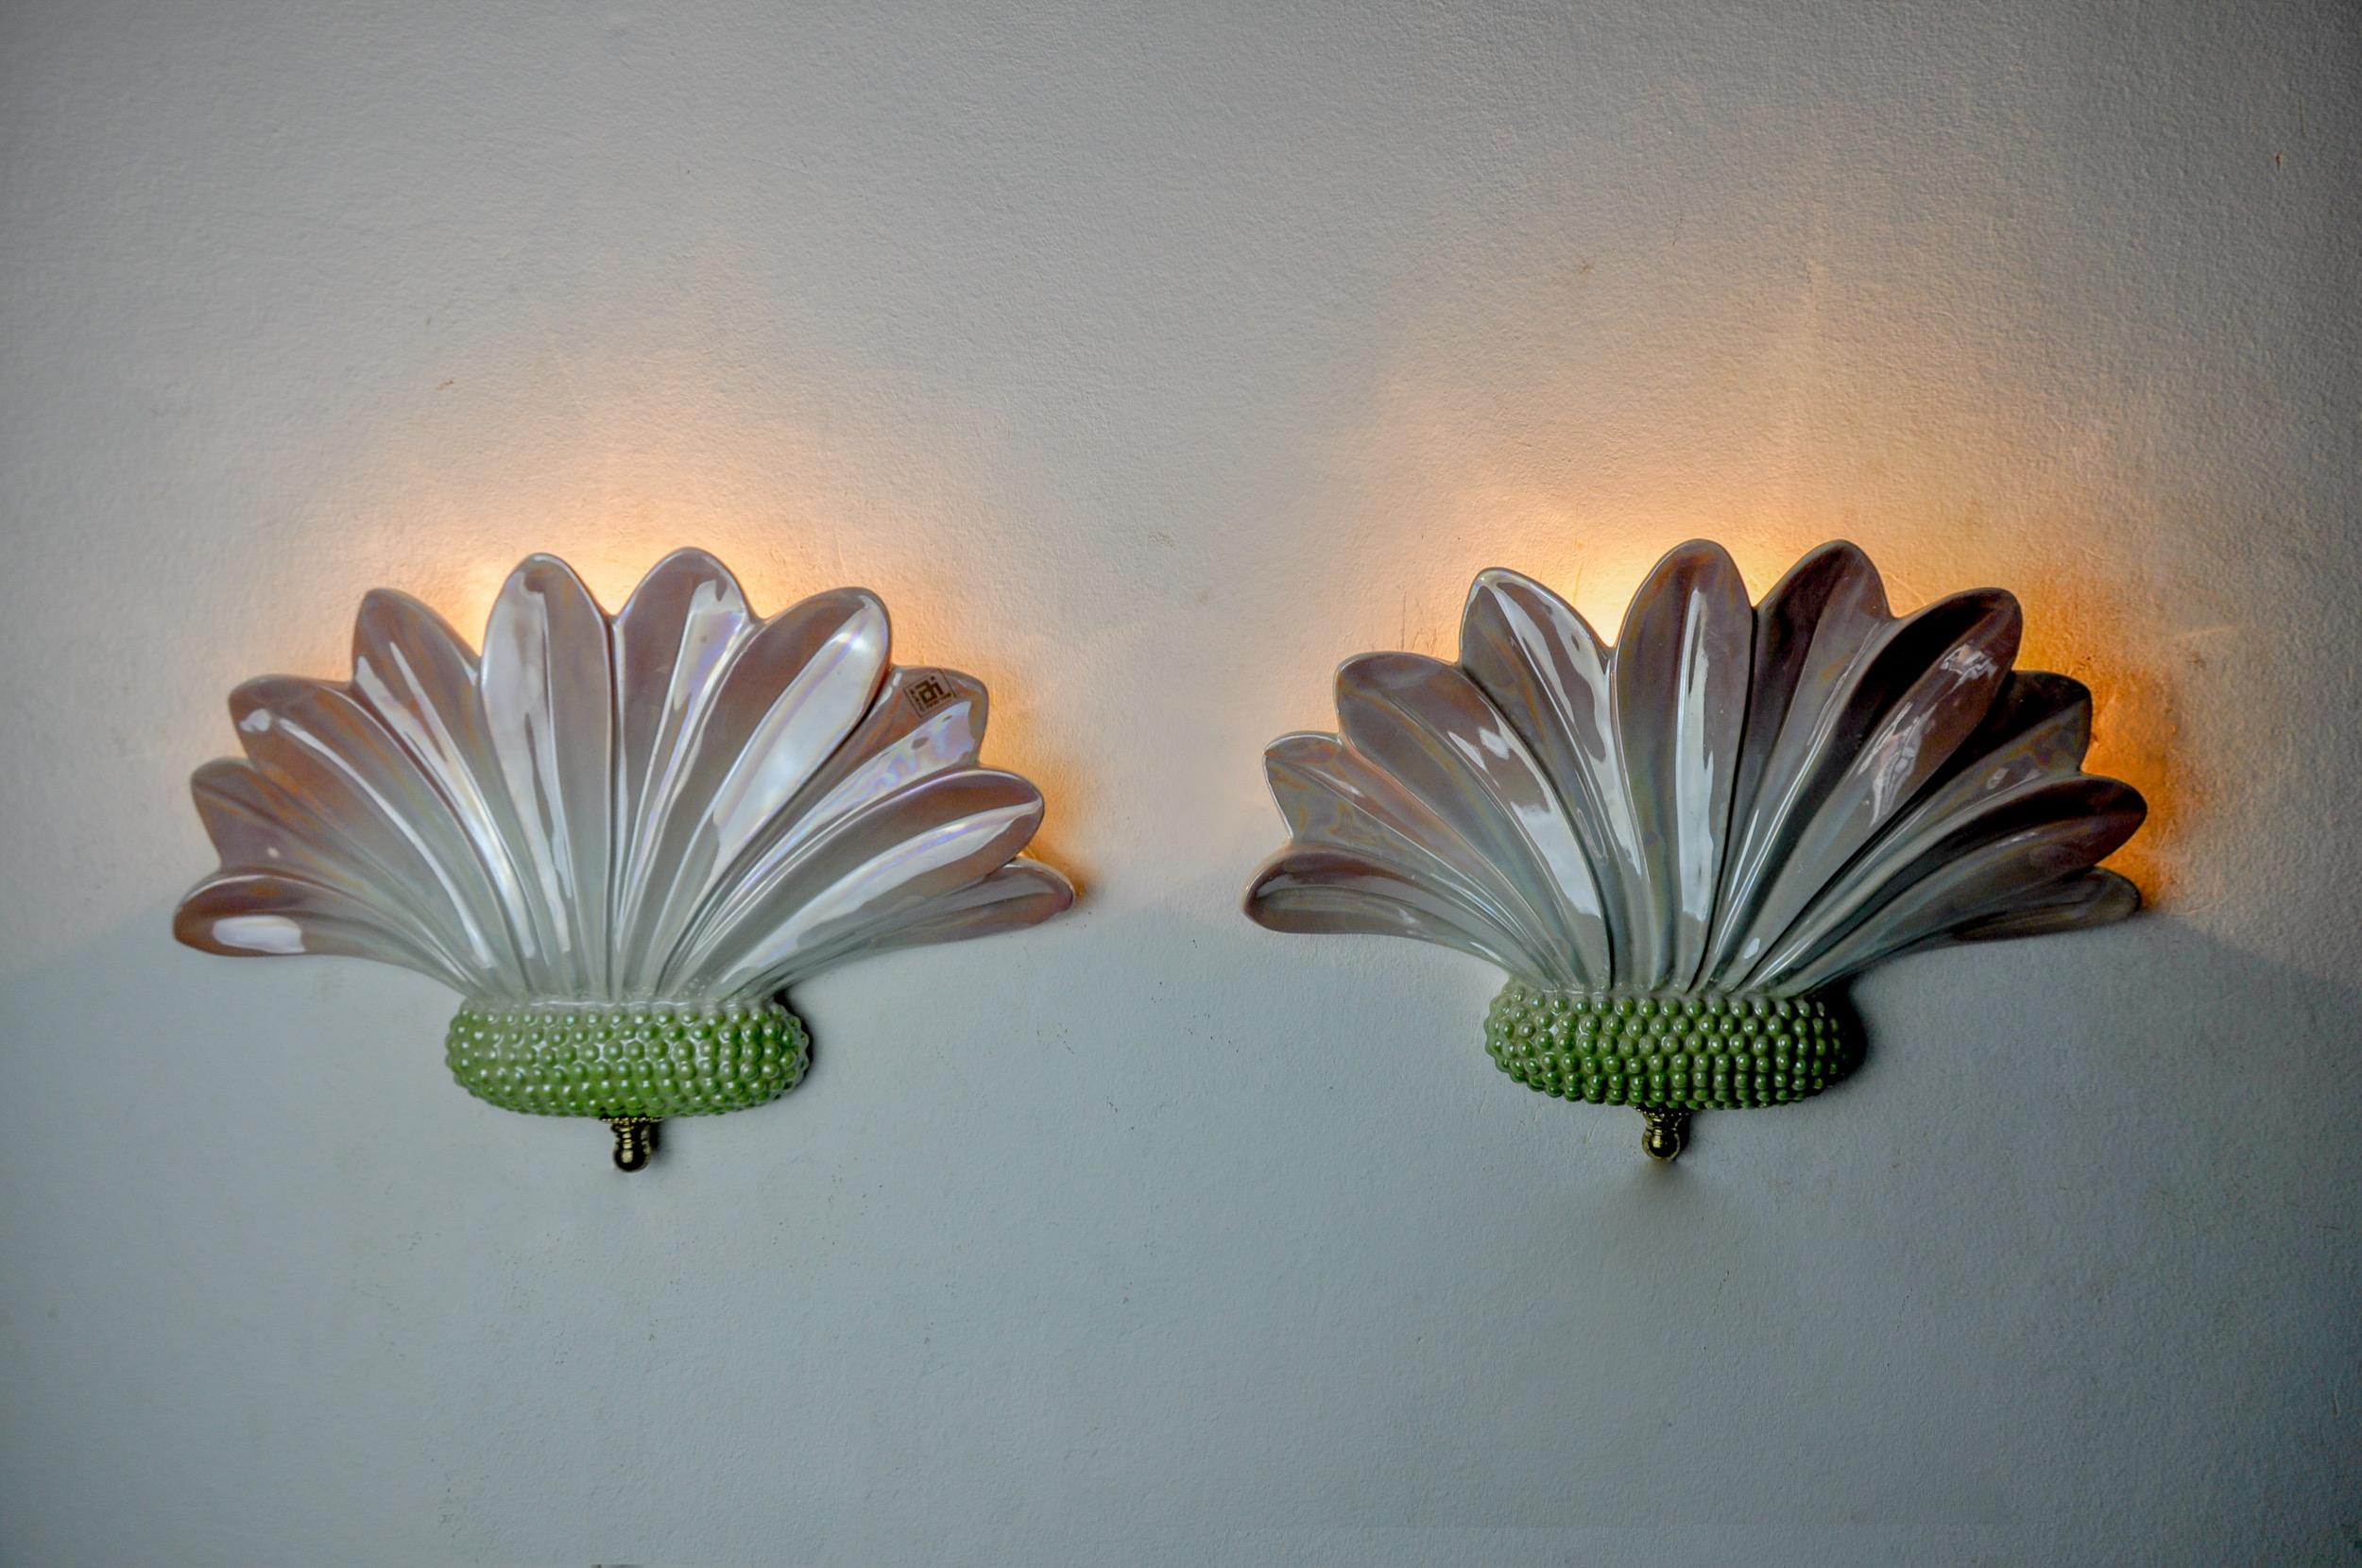 Superb and rare pair of lotus flower sconces designed and produced by ai miner vino in italy in the 1970s. Structure in ceramic and brass representing colorful lotus flowers. Superb decorative objects that will bring a design touch to your interior.